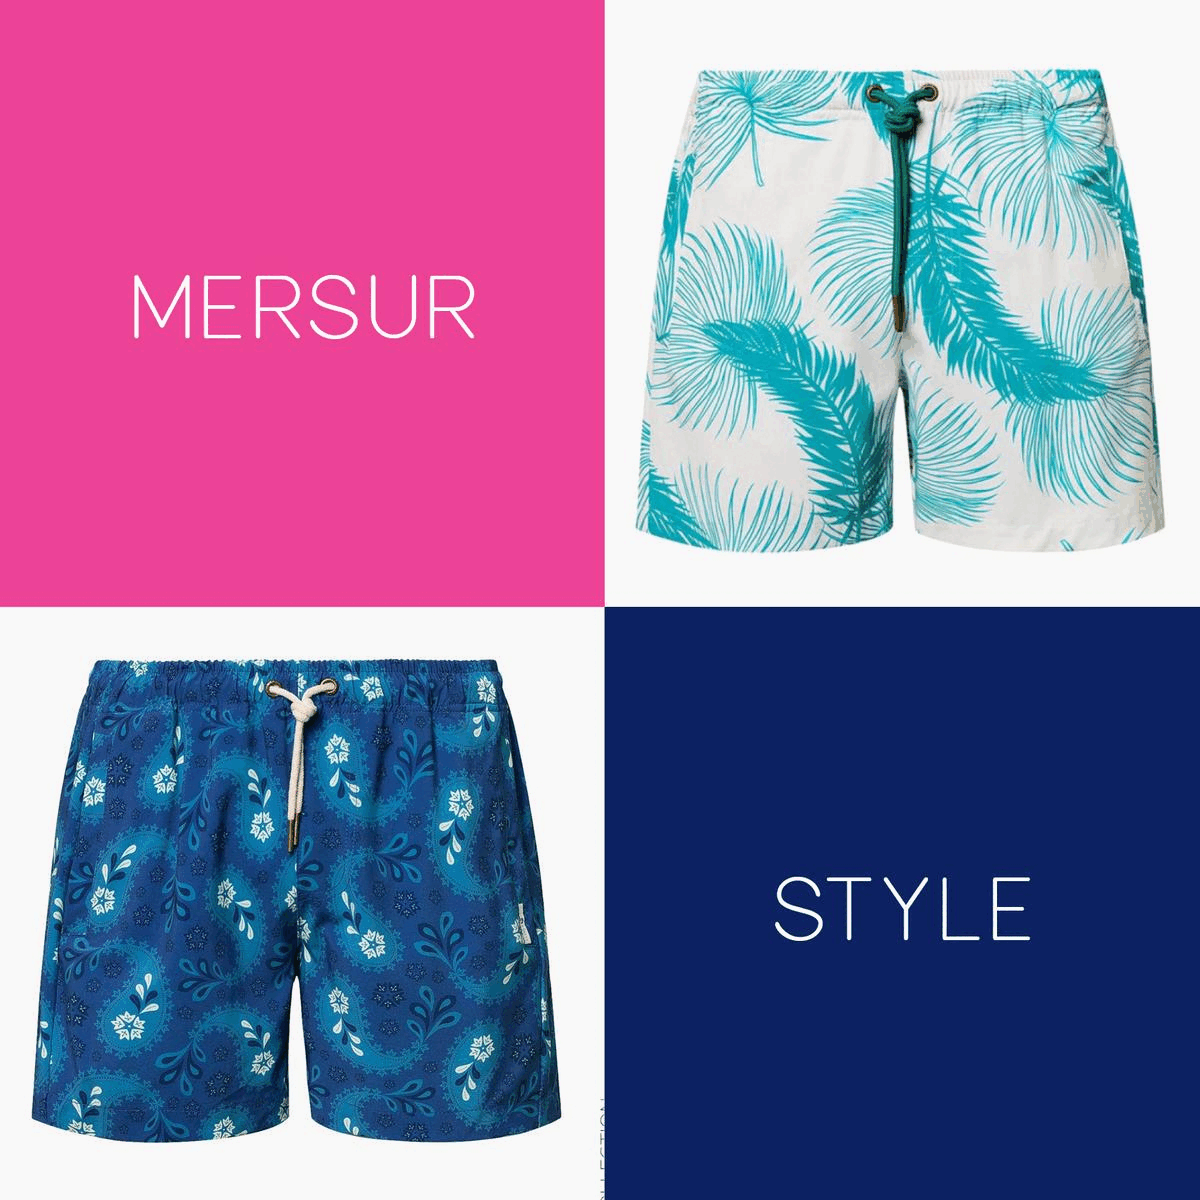 Mens_mersur_Swimsuits.gif